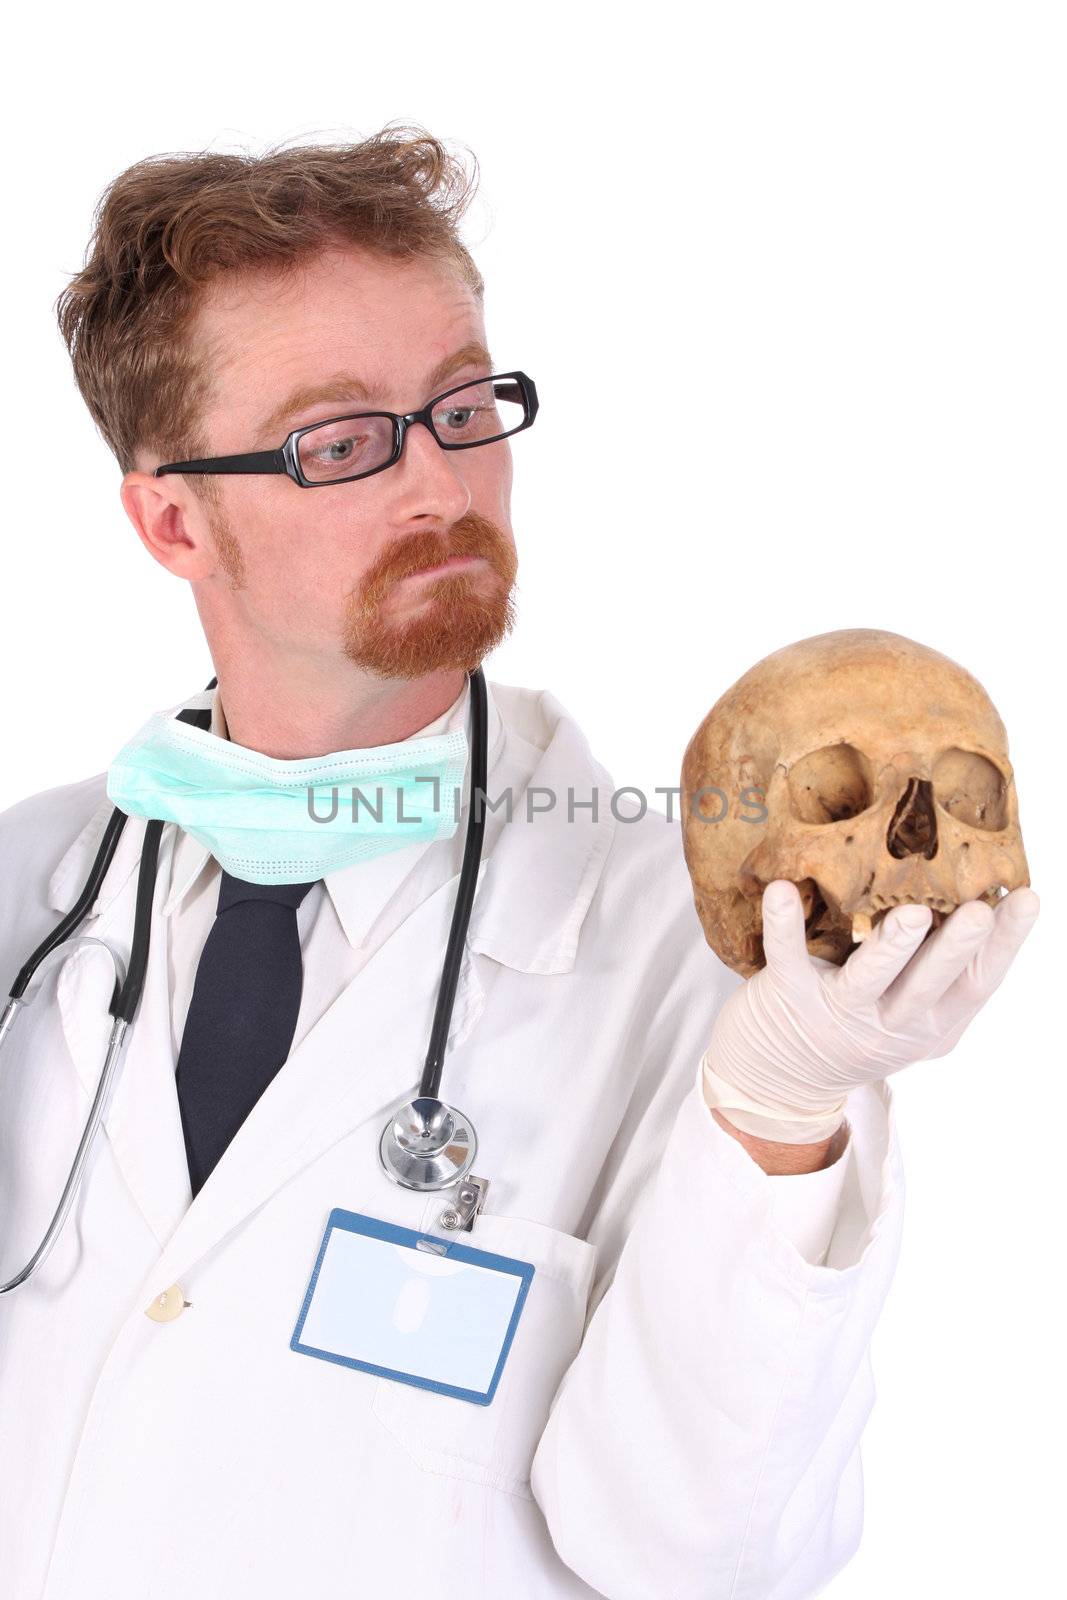 Details doctor with skull on white background